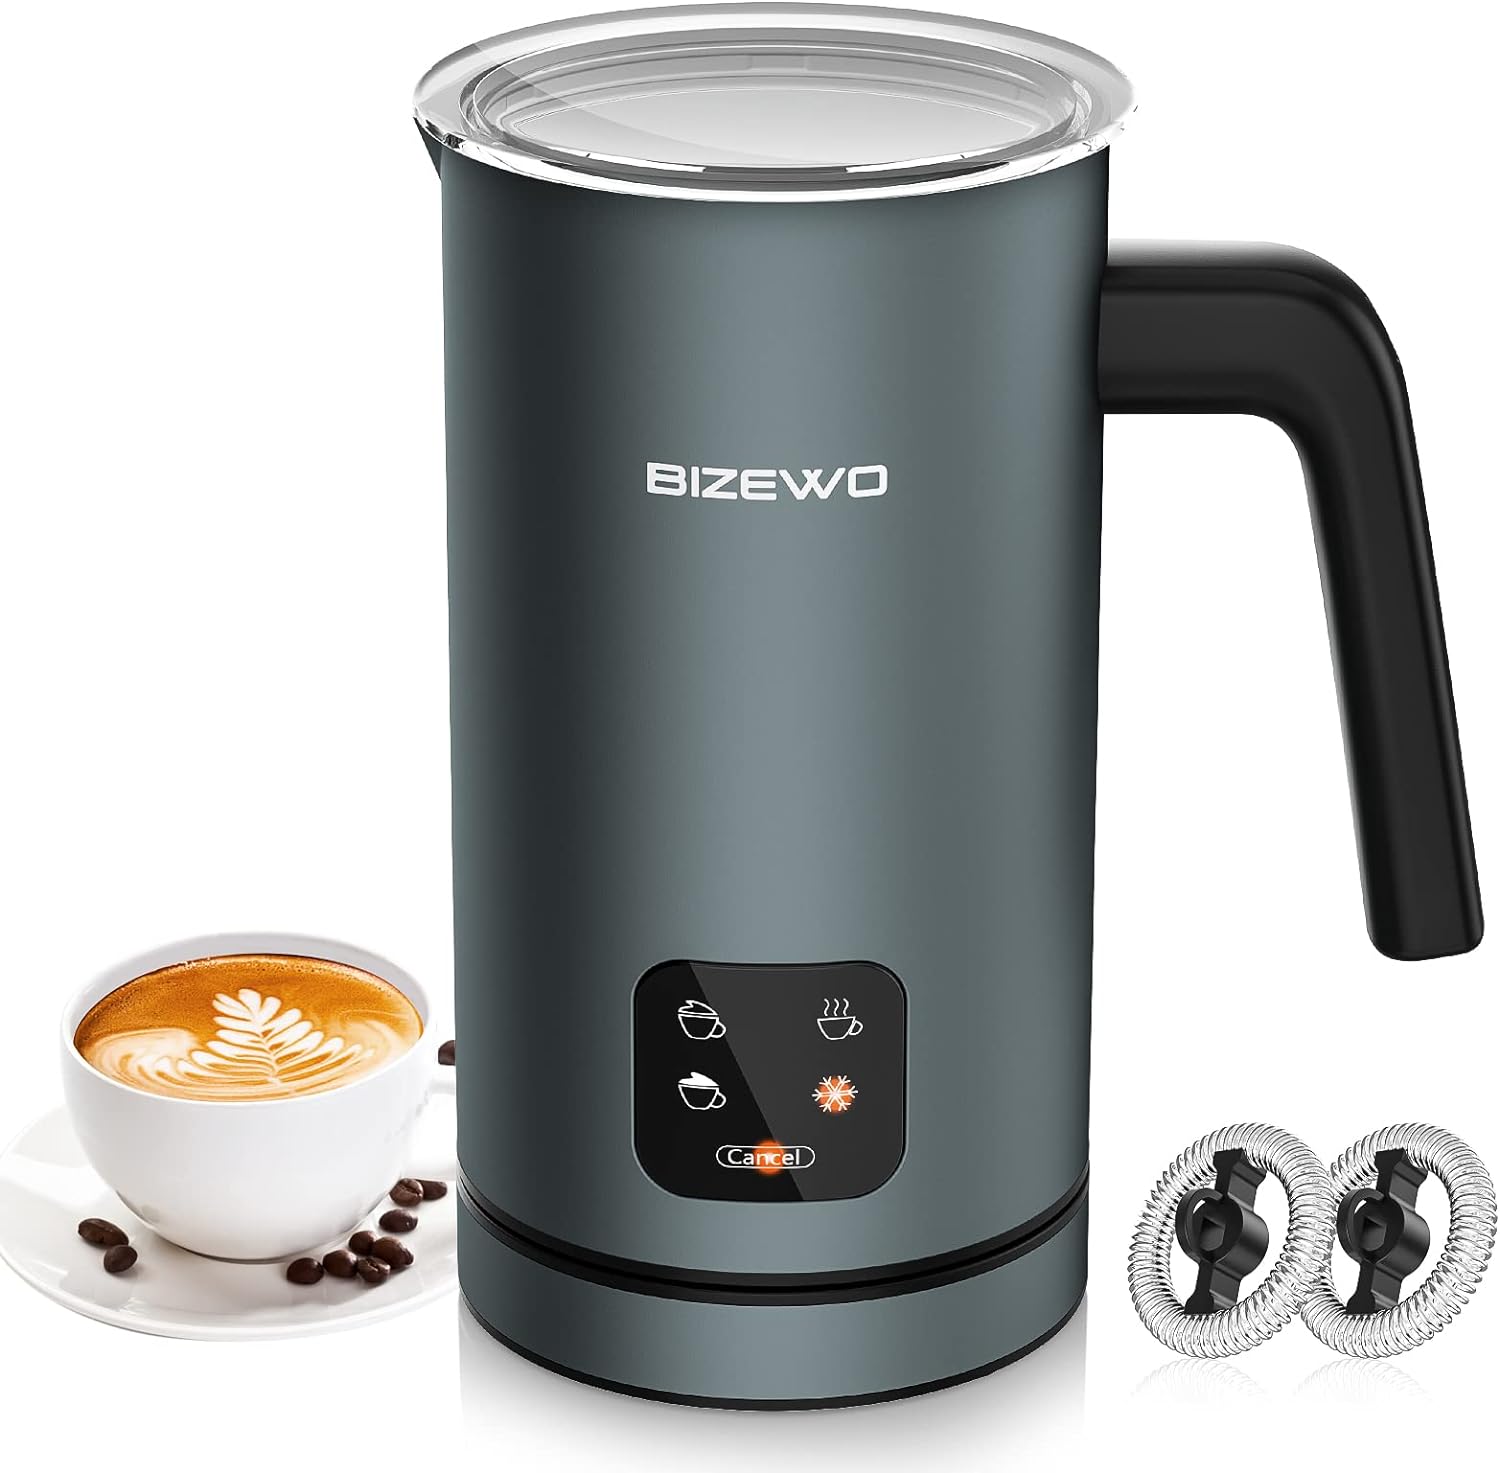 Frother for Coffee, Milk Frother, 4 IN 1 Automatic Hot and Cold Foam Maker, BIZEWO Stainless Steel Milk Steamer for Latte, Cappuccinos, Macchiato, Hot Chocolate Milk with LED Touch(Shipment from FBA)